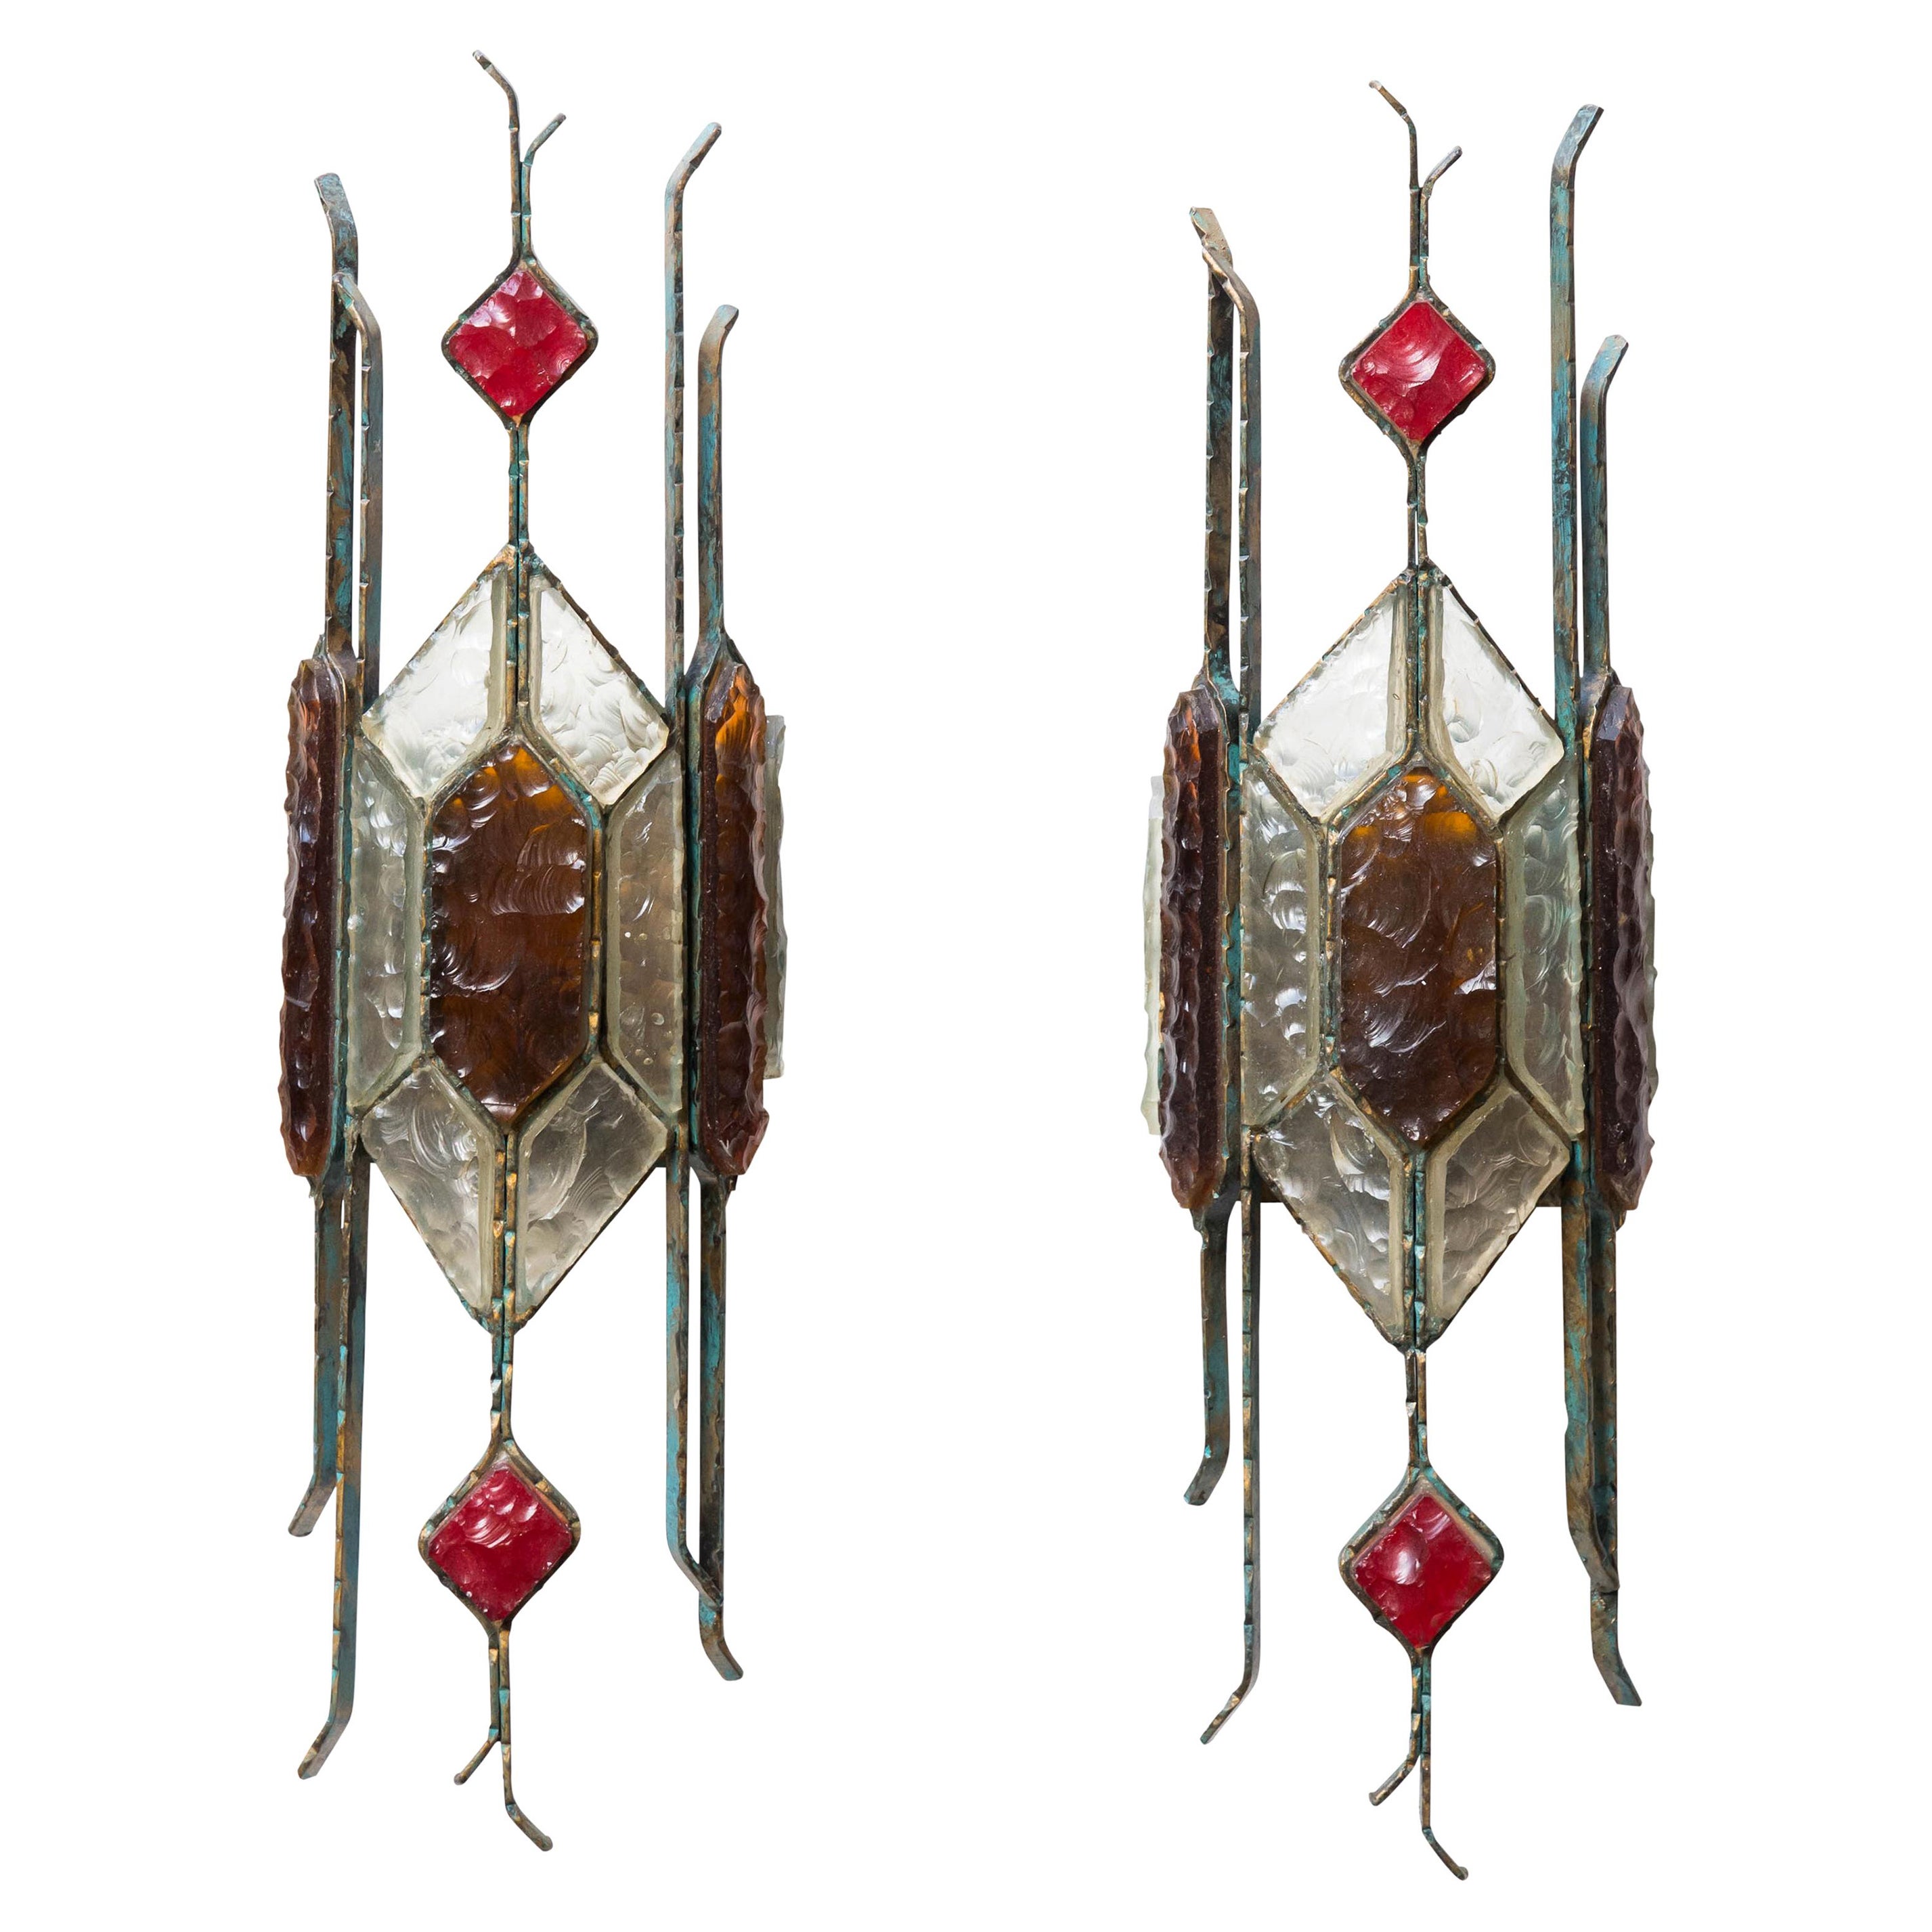 Pair of 1970s Italian Brutalist Sconces Color Glass Italian Design by Longobard